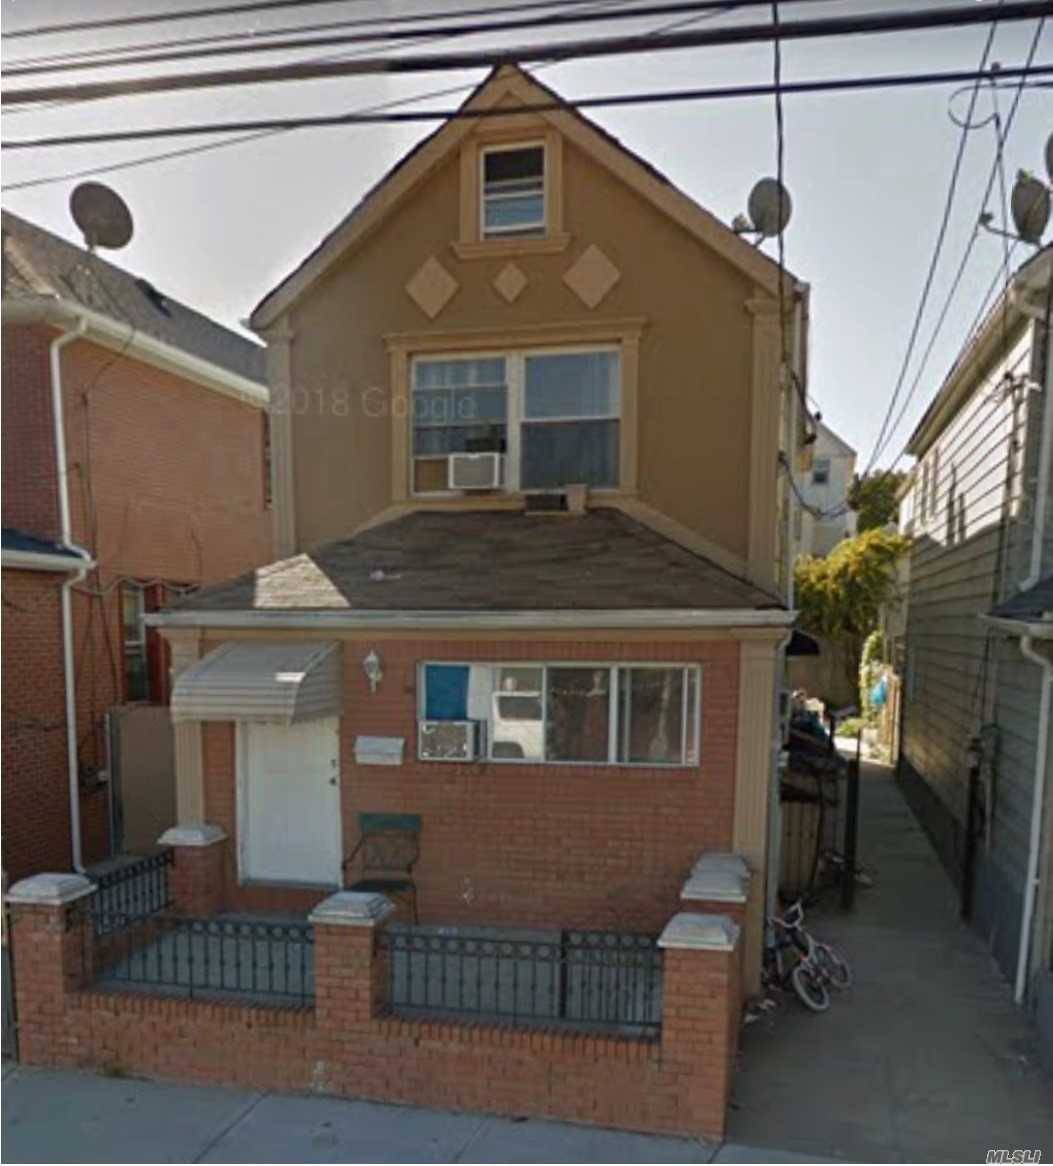 Re- Constructed 2 Family, Fully Detached,  3 Bedrooms 1 Bath , Over 3 Bedrooms, 1 Bath Full Finished, Basement.